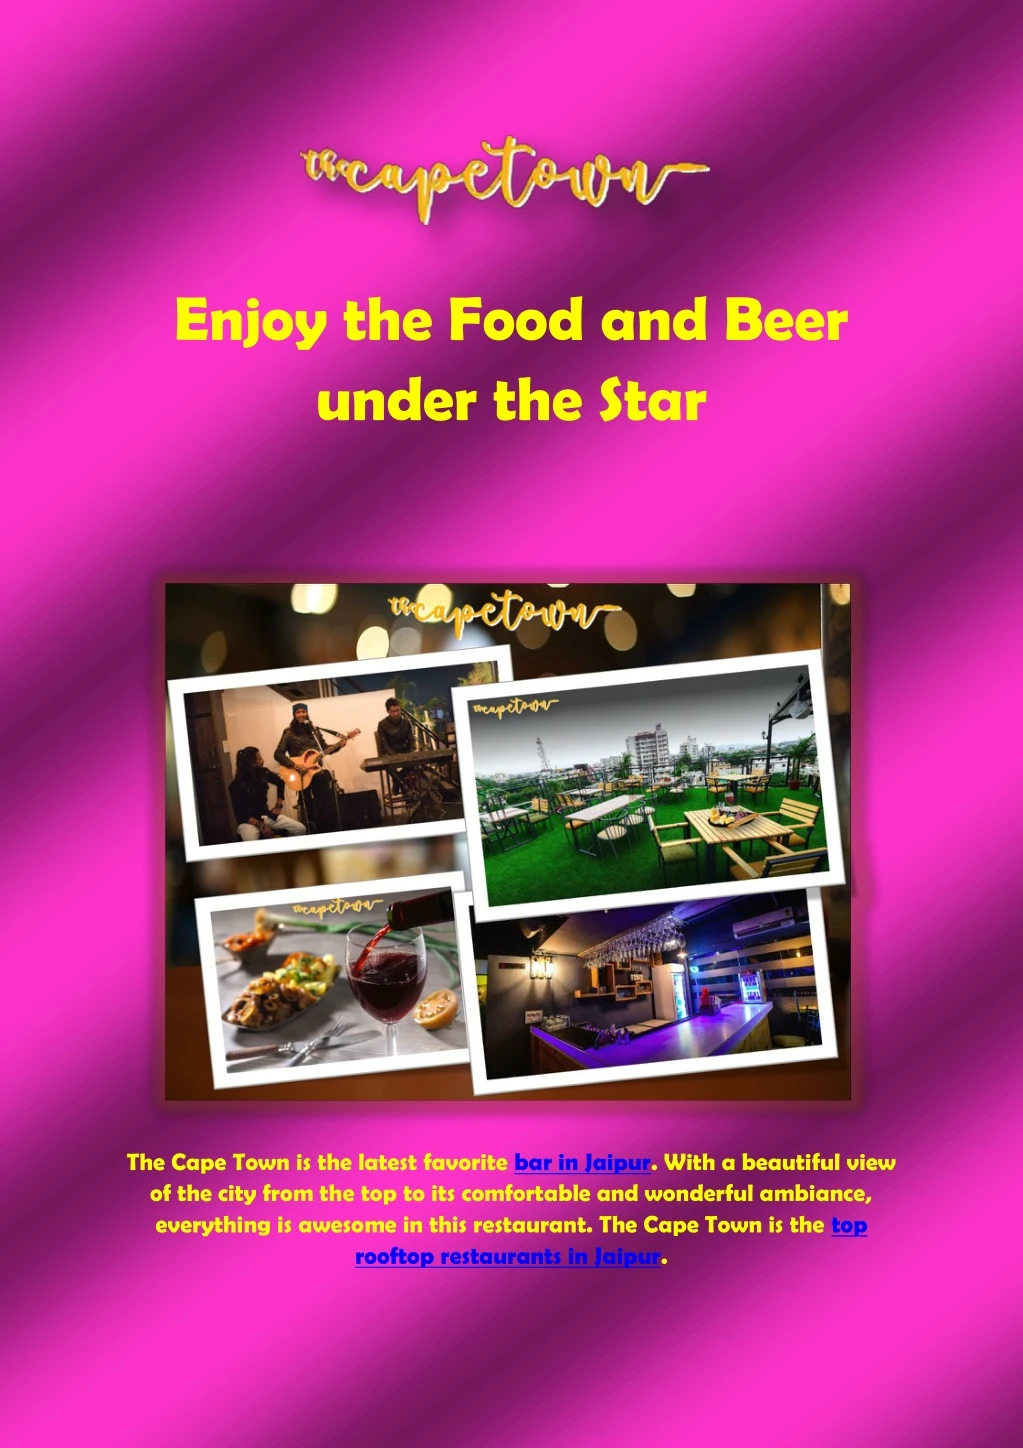 enjoy the food and beer under the star